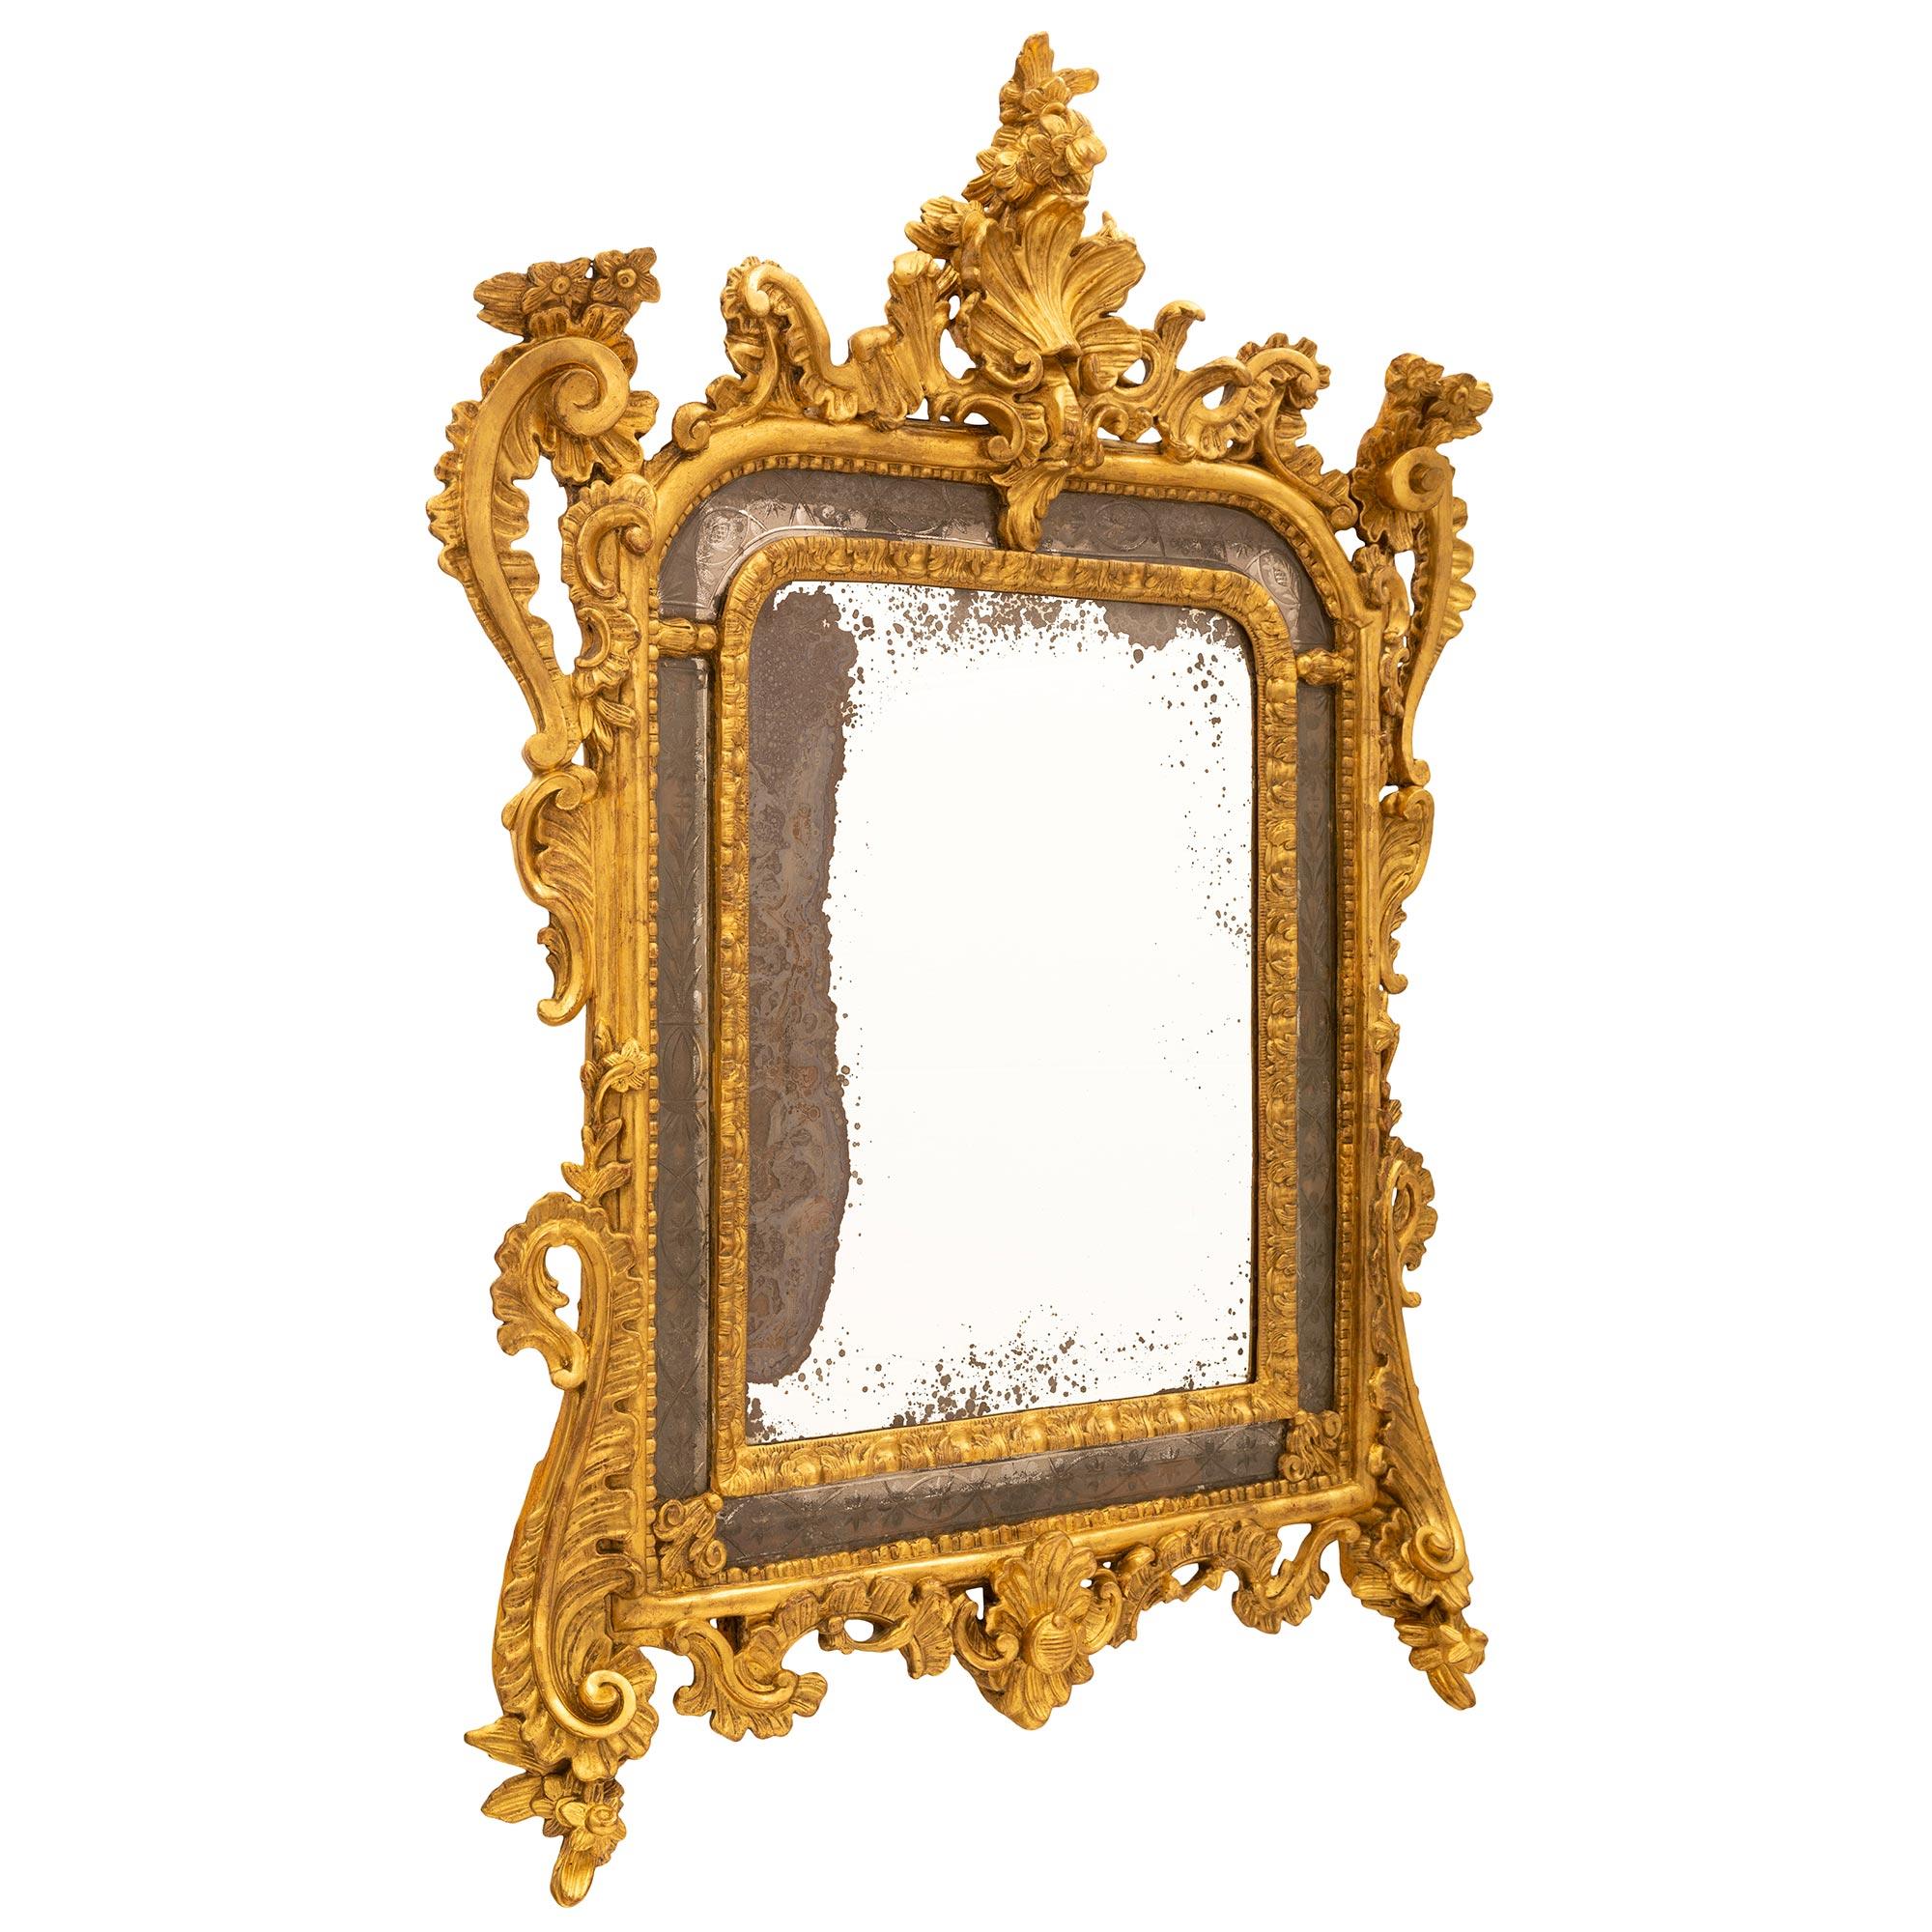 A striking Italian 18th century Baroque st. double framed giltwood mirror. The mirror retains all of its original mirror plates throughout with the central mirror plate framed within a finely carved foliate border and the outer mirror plates